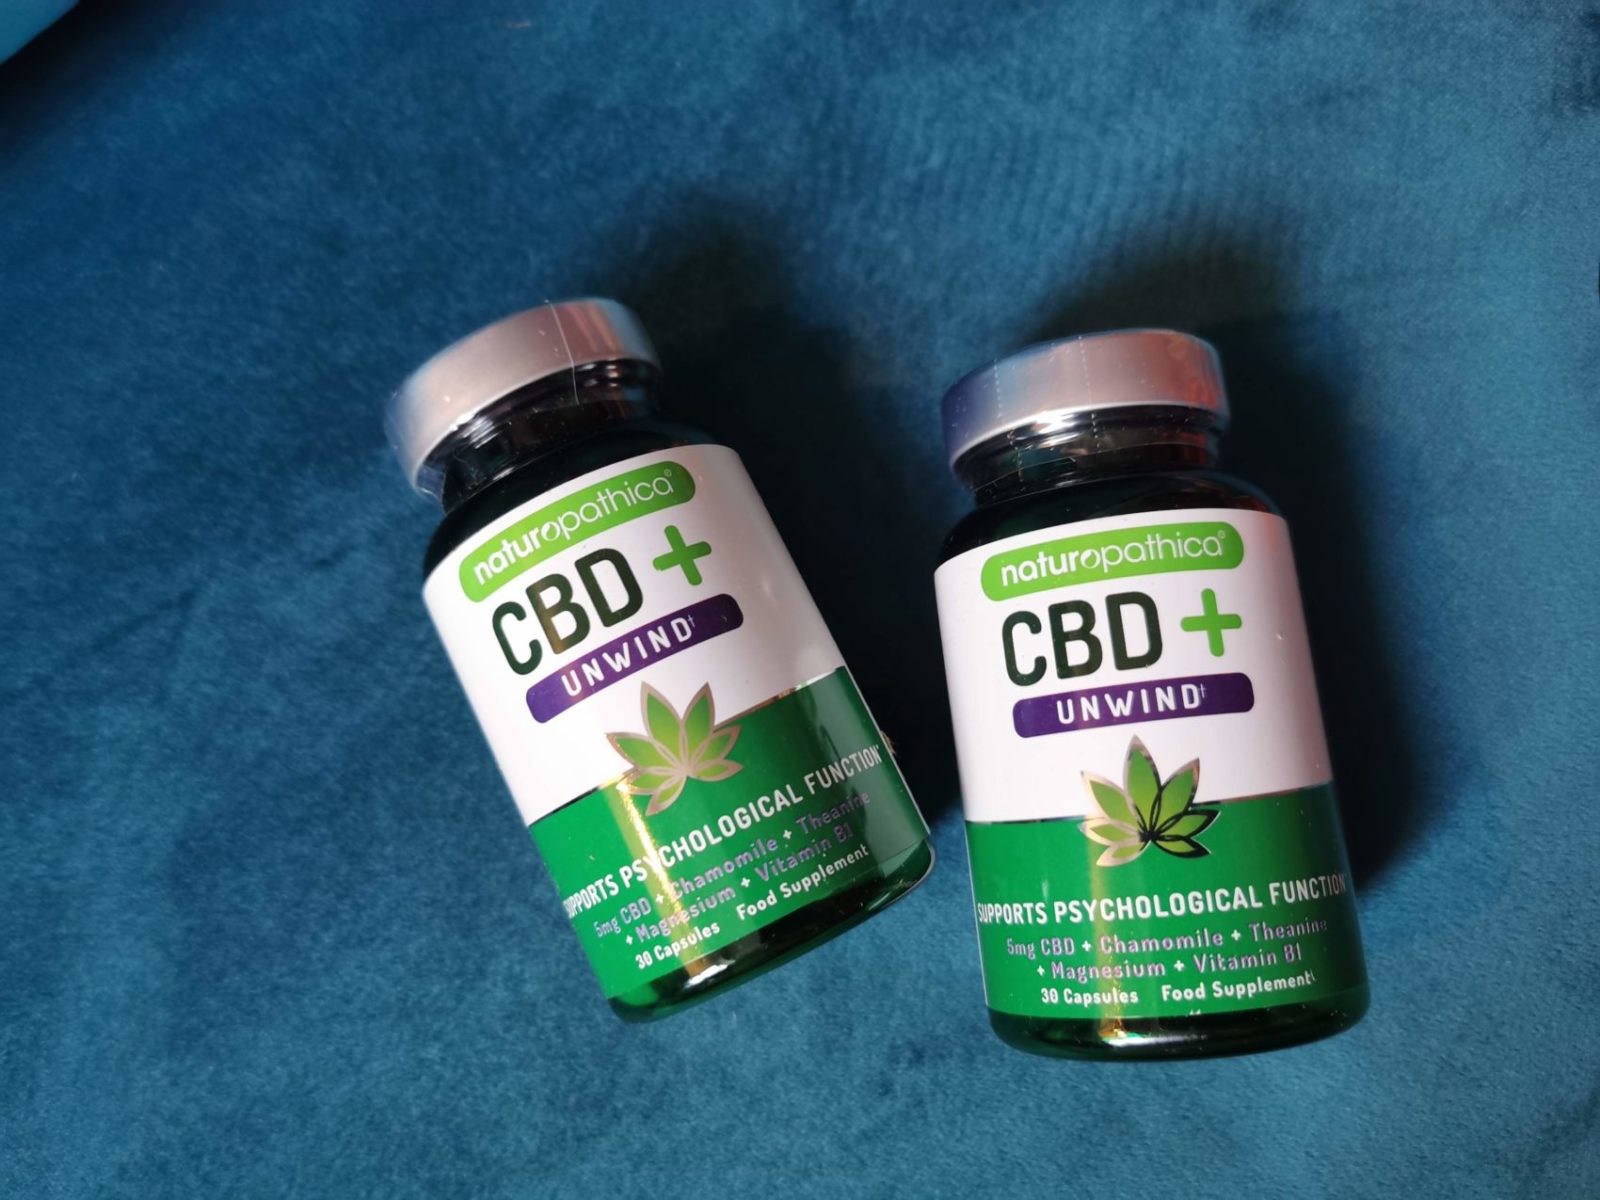 My 30 Day Naturopathica CBD Wellbeing Experiment